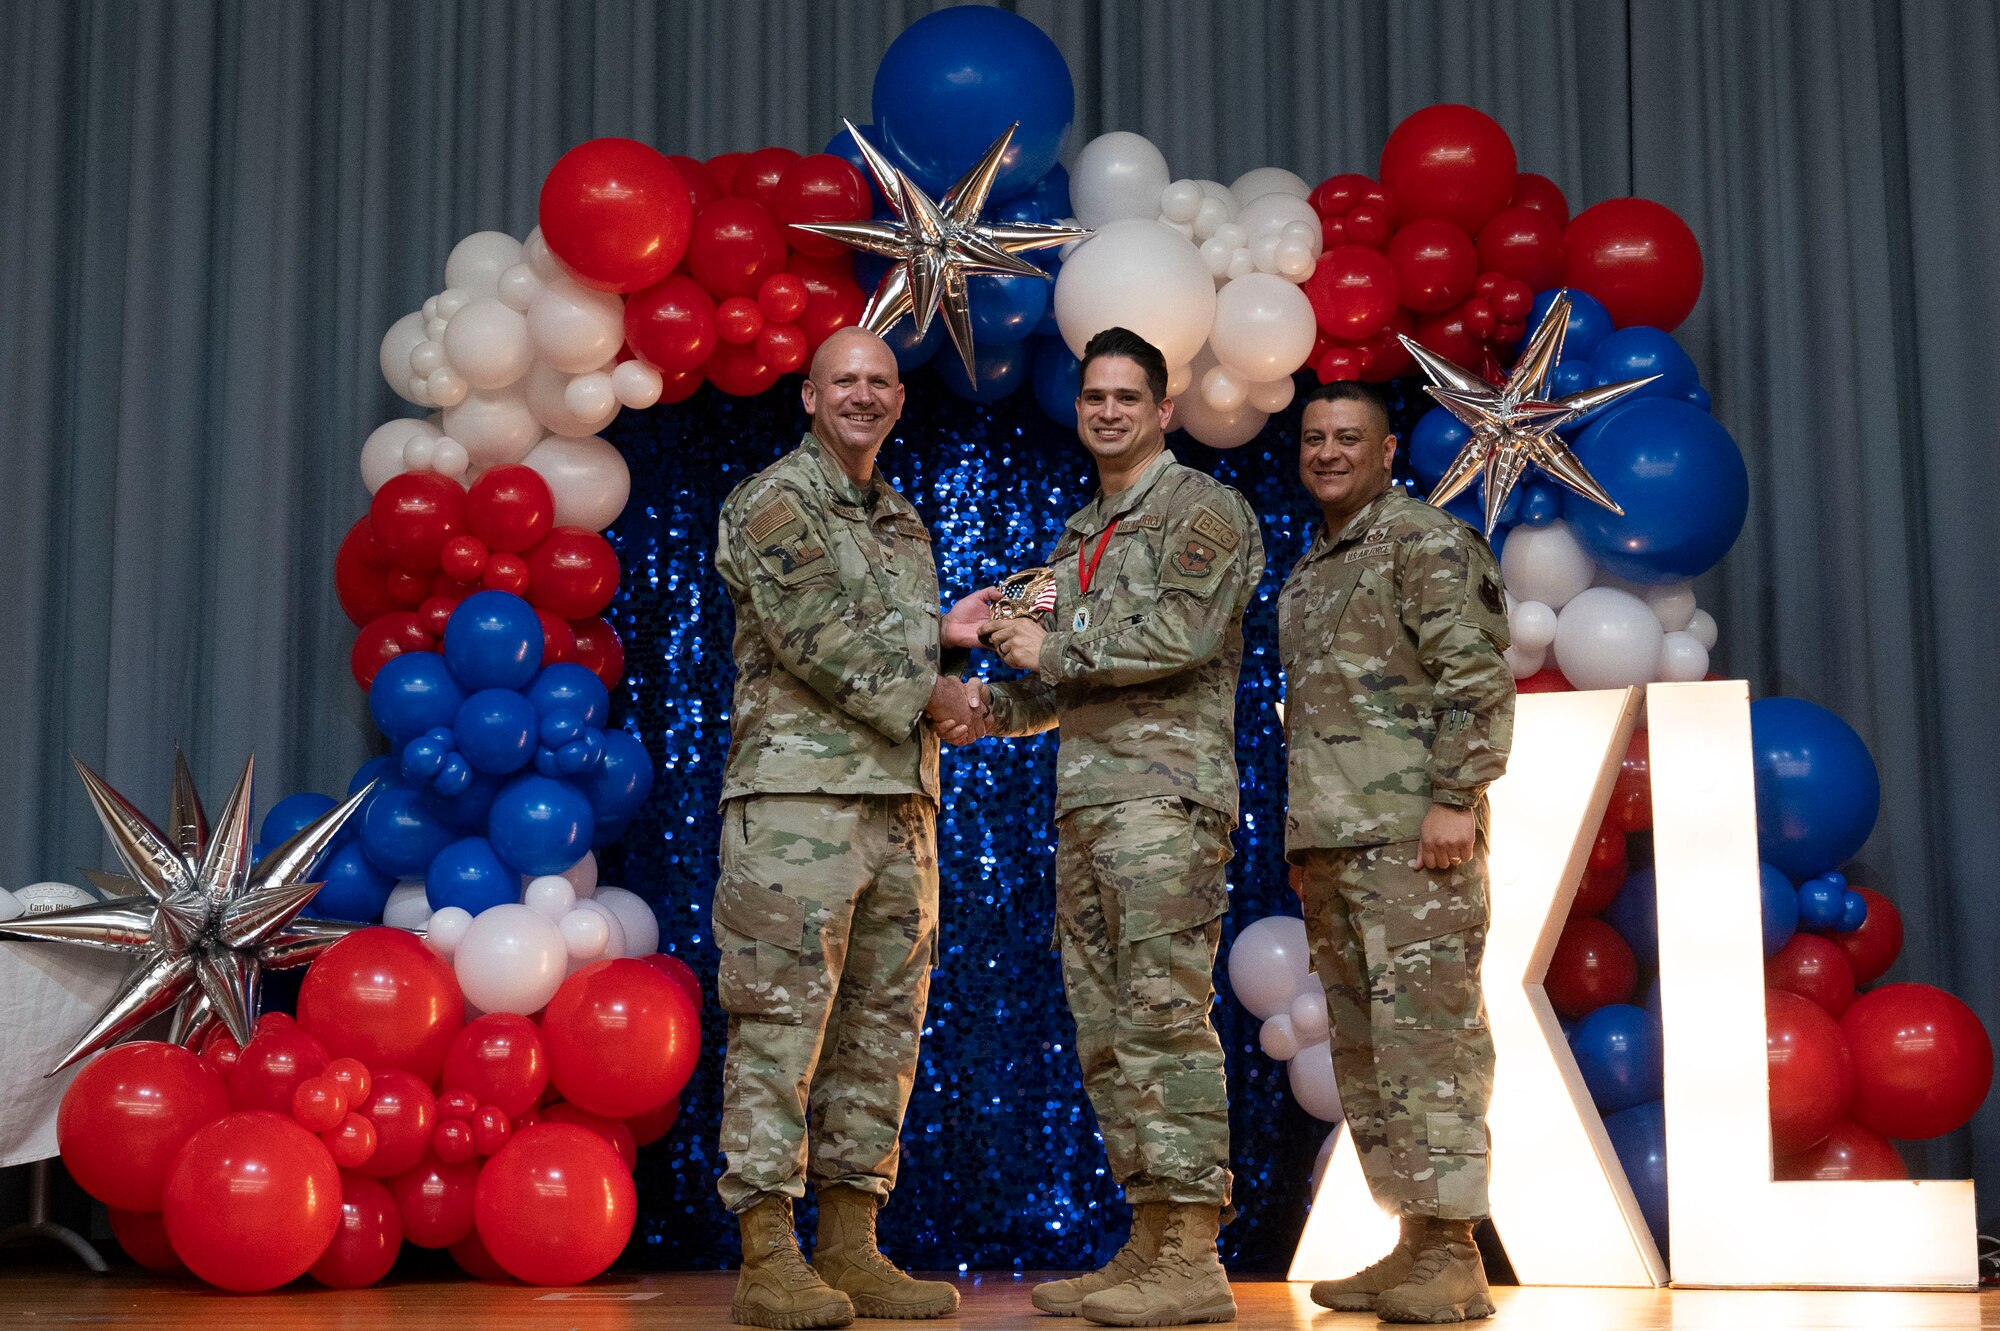 U.S. Air Force Col. Kevin Davidson, 47th Flying Training Wing (FTW) commander, and Chief Master Sgt. Lester Largaespada, 47th FTW command chief, present Tech. Sgt. Christian Ramos, 47th Mission Support Group, an award during the 2023 47th FTW Annual Awards Ceremony at Laughlin Air Force Base, Texas, Feb. 2, 2024. The annual awards recognized the top performers throughout the 47th Flying Training Wing during fiscal year 2023. (U.S. Air Force photo by Senior Airman Kailee Reynolds)